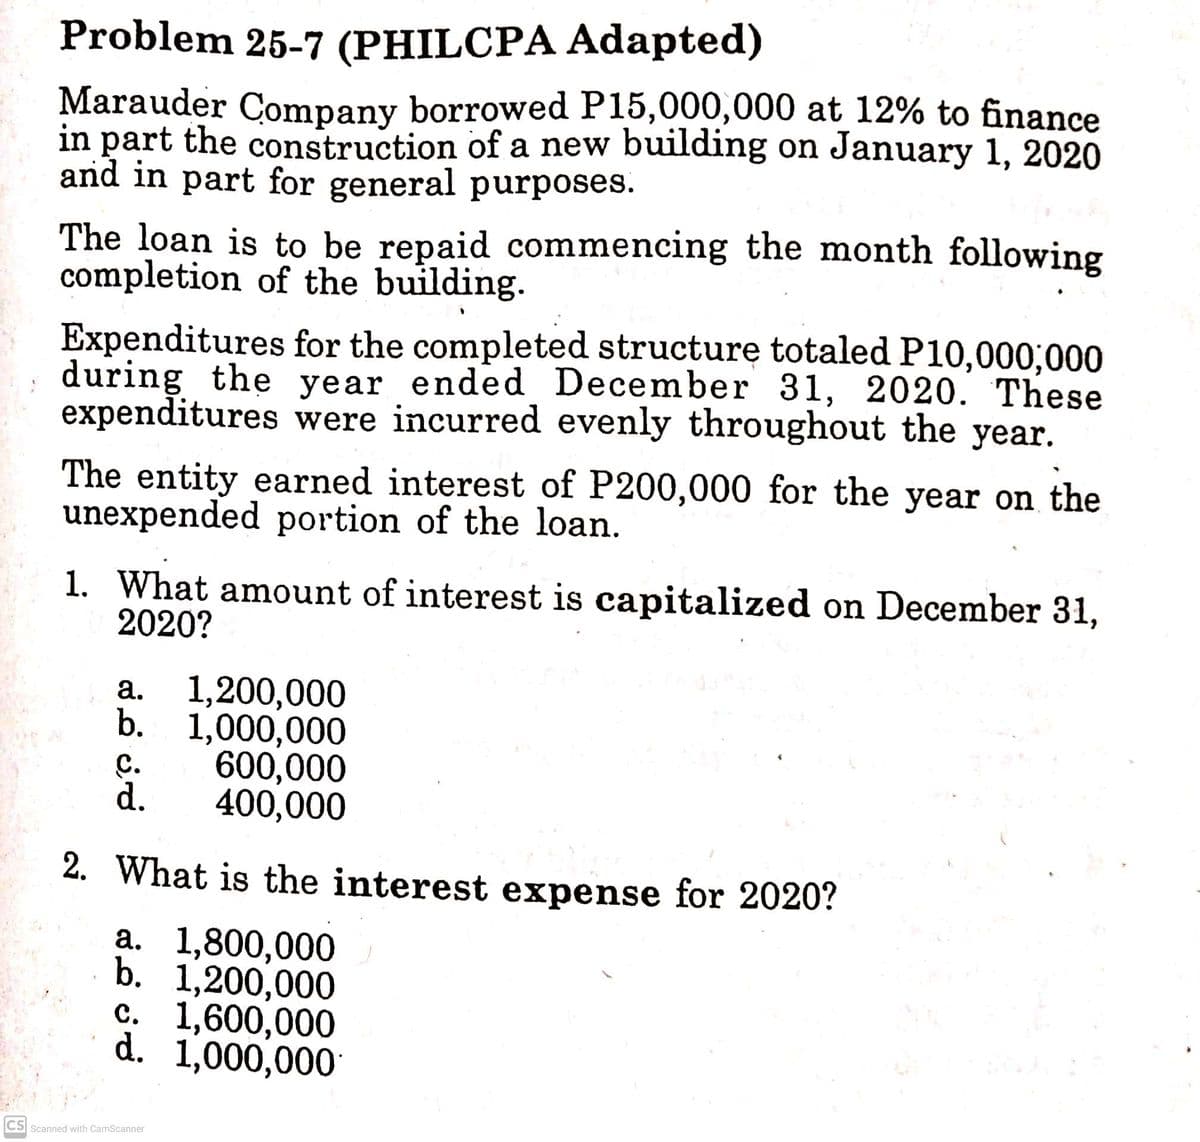 Problem 25-7 (PHILCPA Adapted)
Marauder Company borrowed P15,000,000 at 12% to finance
in part the construction of a new building on January 1, 2020
and in part for general purposes.
The loan is to be repaid commencing the month following
completion of the building.
Expenditures for the completed structure totaled P10,000;000
during the year ended December 31, 2020. These
expenditures were incurred evenly throughout the year.
The entity earned interest of P200,000 for the year on the
unexpended portion of the loan.
1. What amount of interest is capitalized on December 31,
2020?
1,200,000
b. 1,000,000
600,000
400,000
а.
С.
d.
2. What is the interest expense for 2020?
а. 1,800,000
b. 1,200,000
c. 1,600,000
d. 1,000,000
CS Scanned with CamScanner
